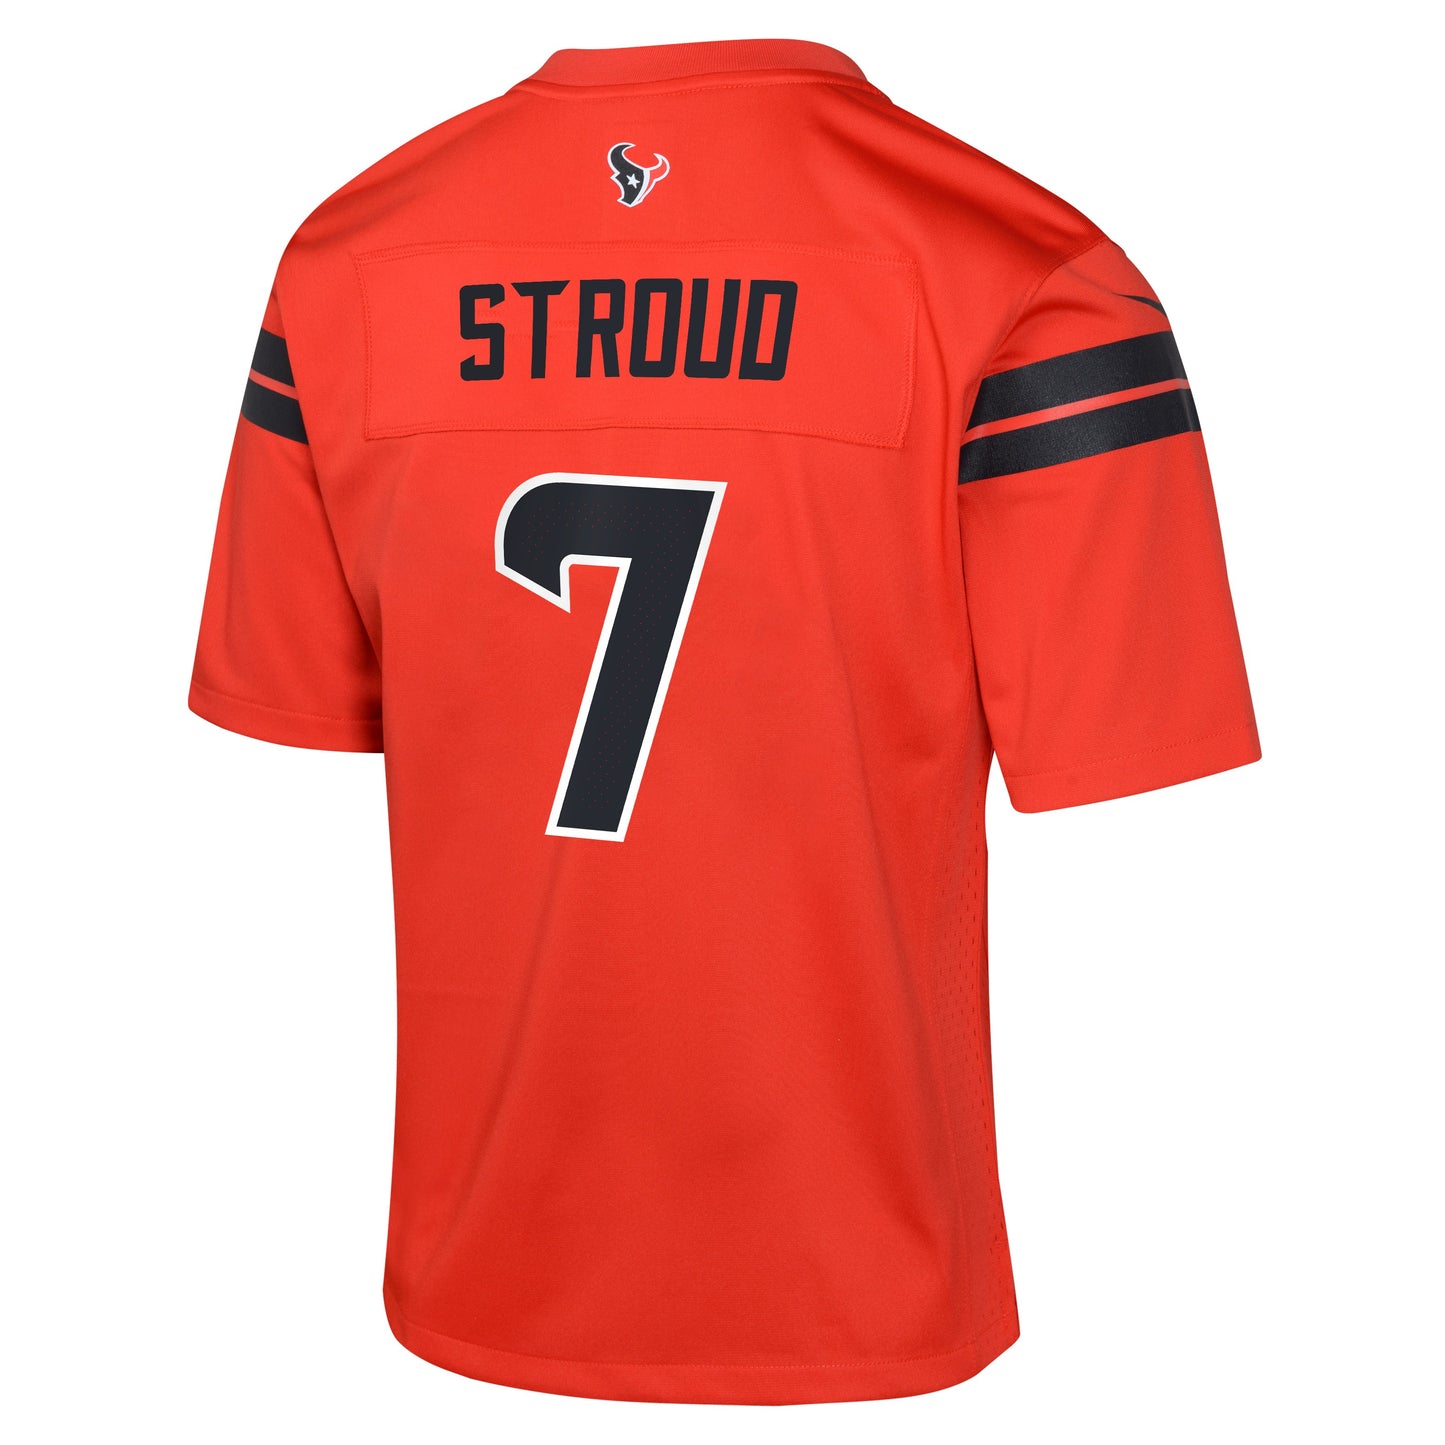 Youth Houston Texans C.J. Stroud Nike Red Alternate 24 Game Jersey